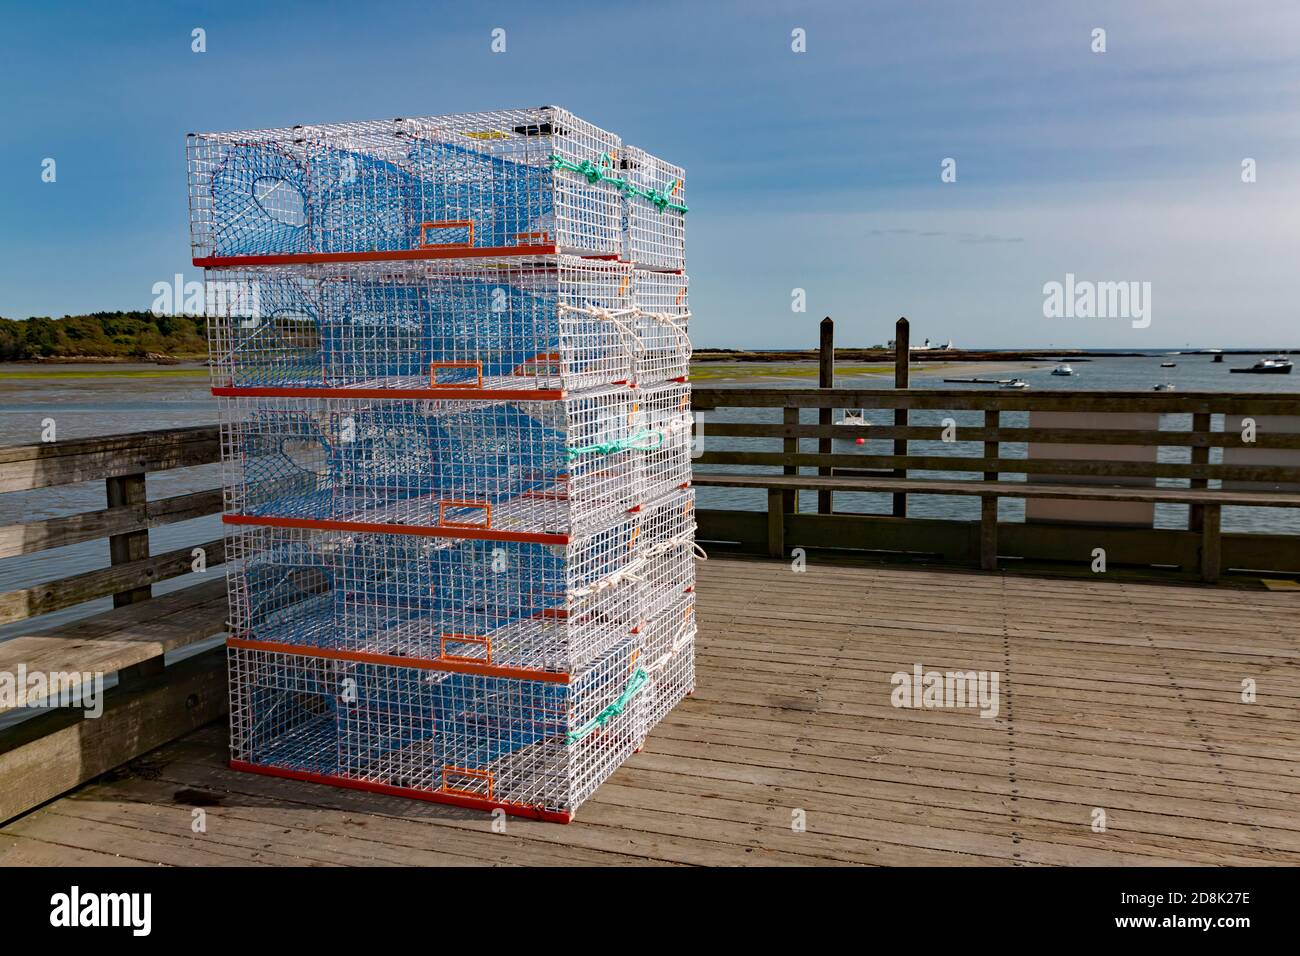 New, unused, welded wire mesh commercial lobster and crab traps stacked on a dock in Kennebunkport, Maine, United States. Stock Photo